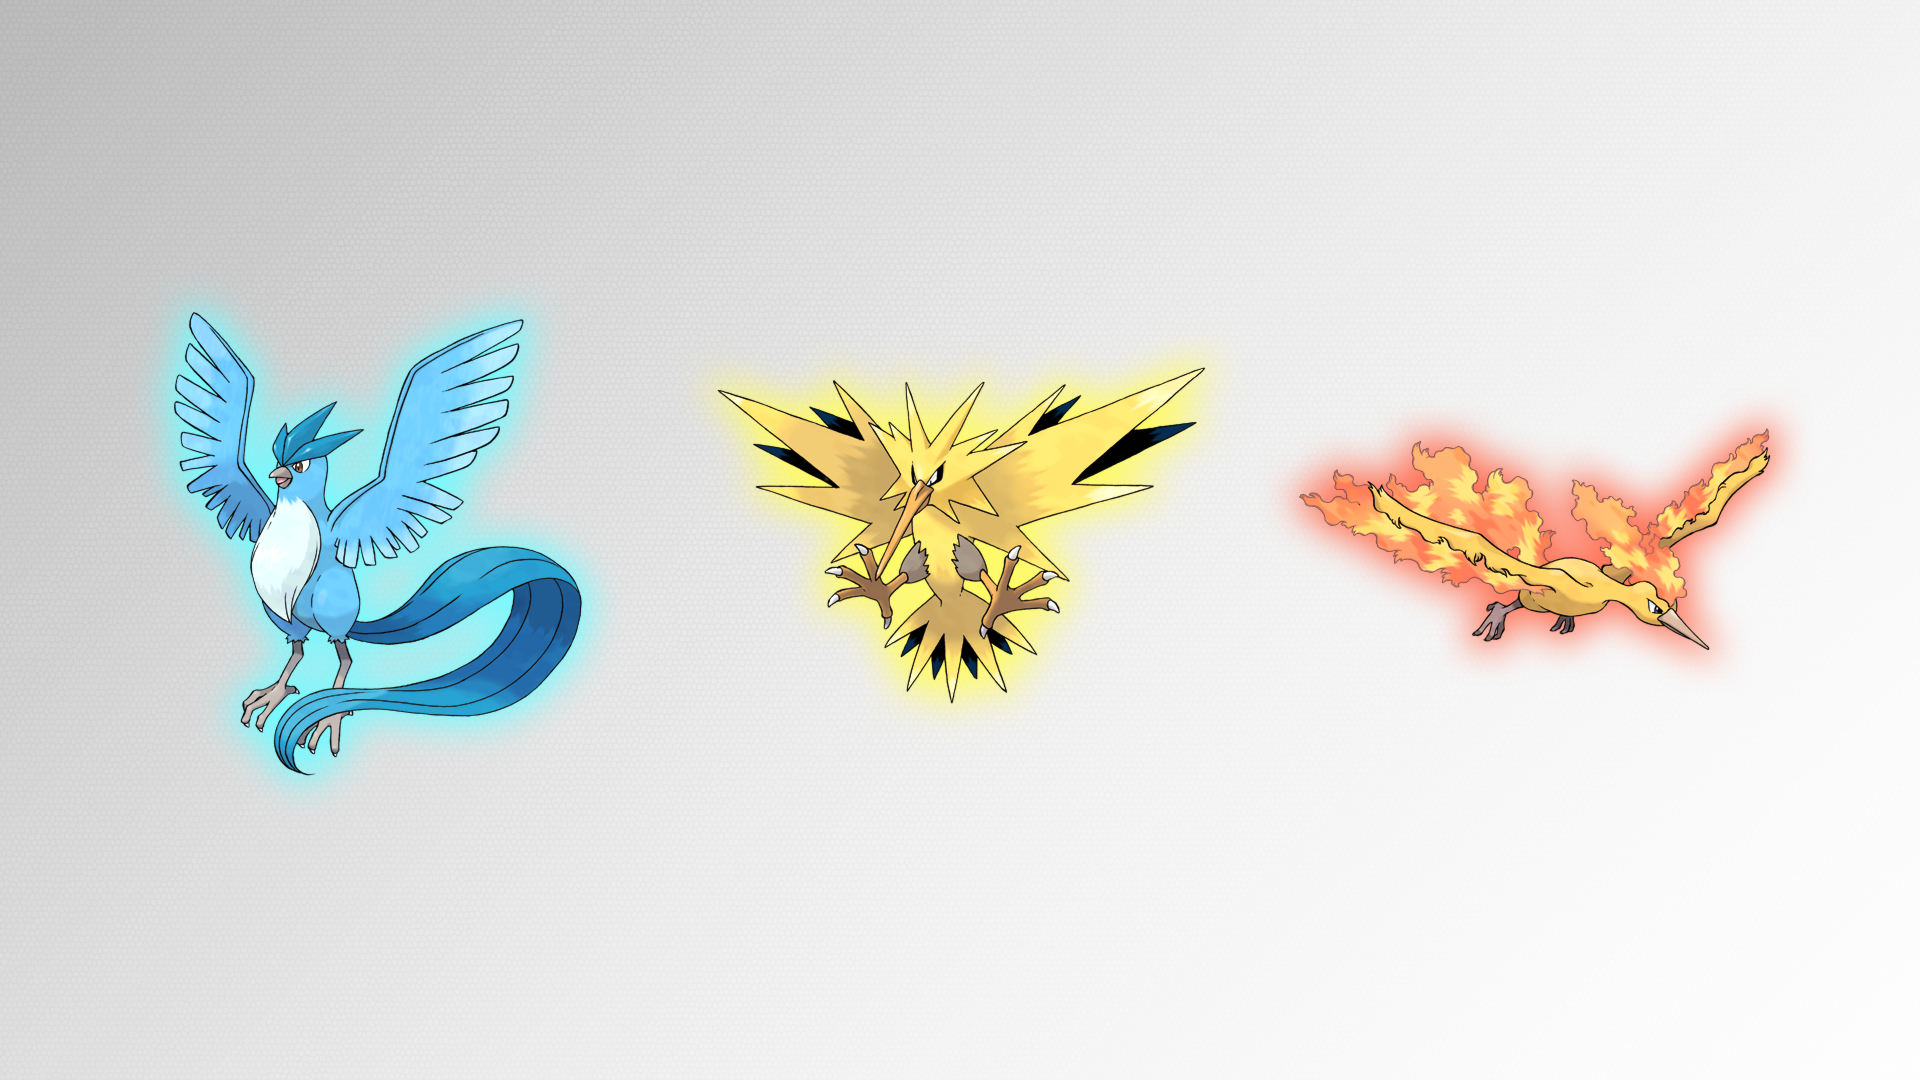 Articuno Zapdos And Moltres Wallpaper By Glench